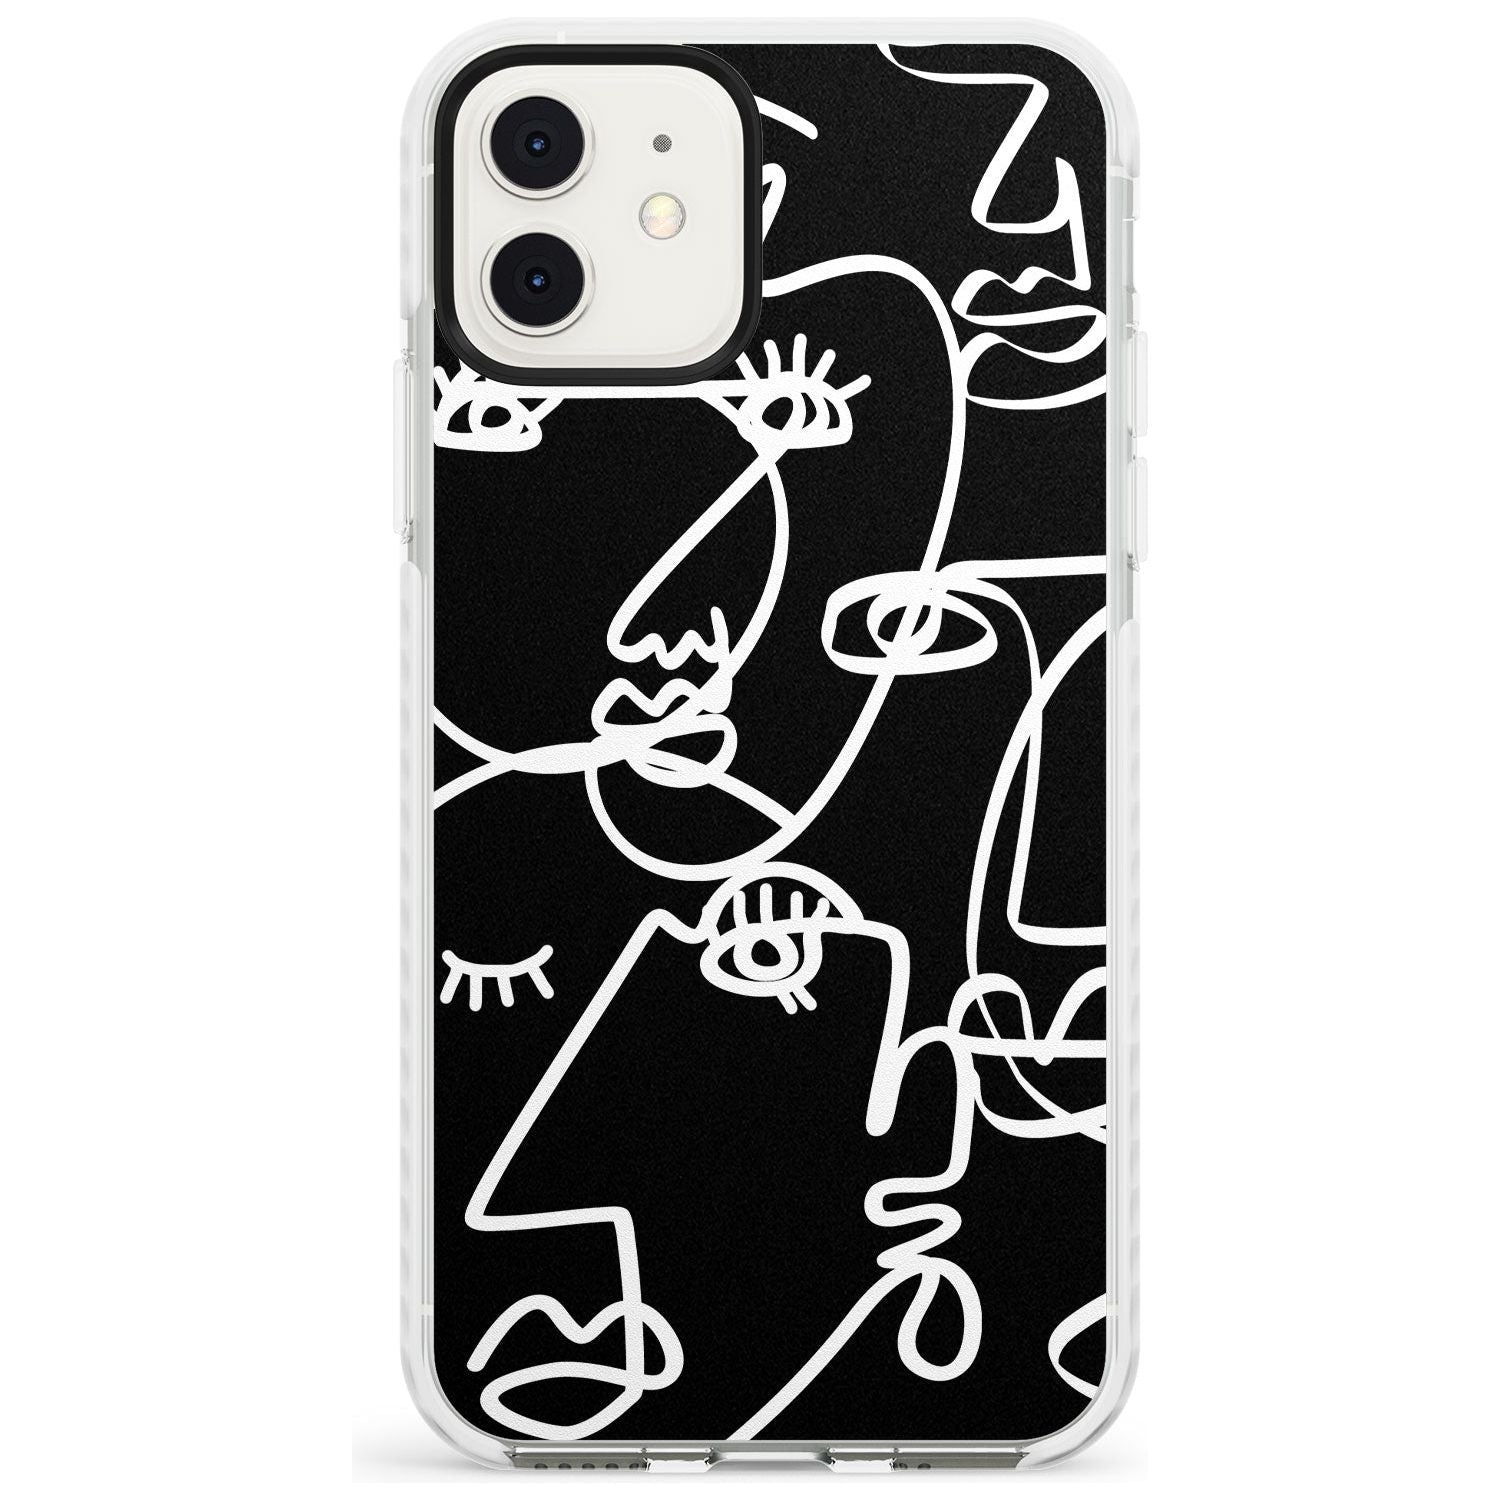 Continuous Line Faces: White on Black Slim TPU Phone Case for iPhone 11